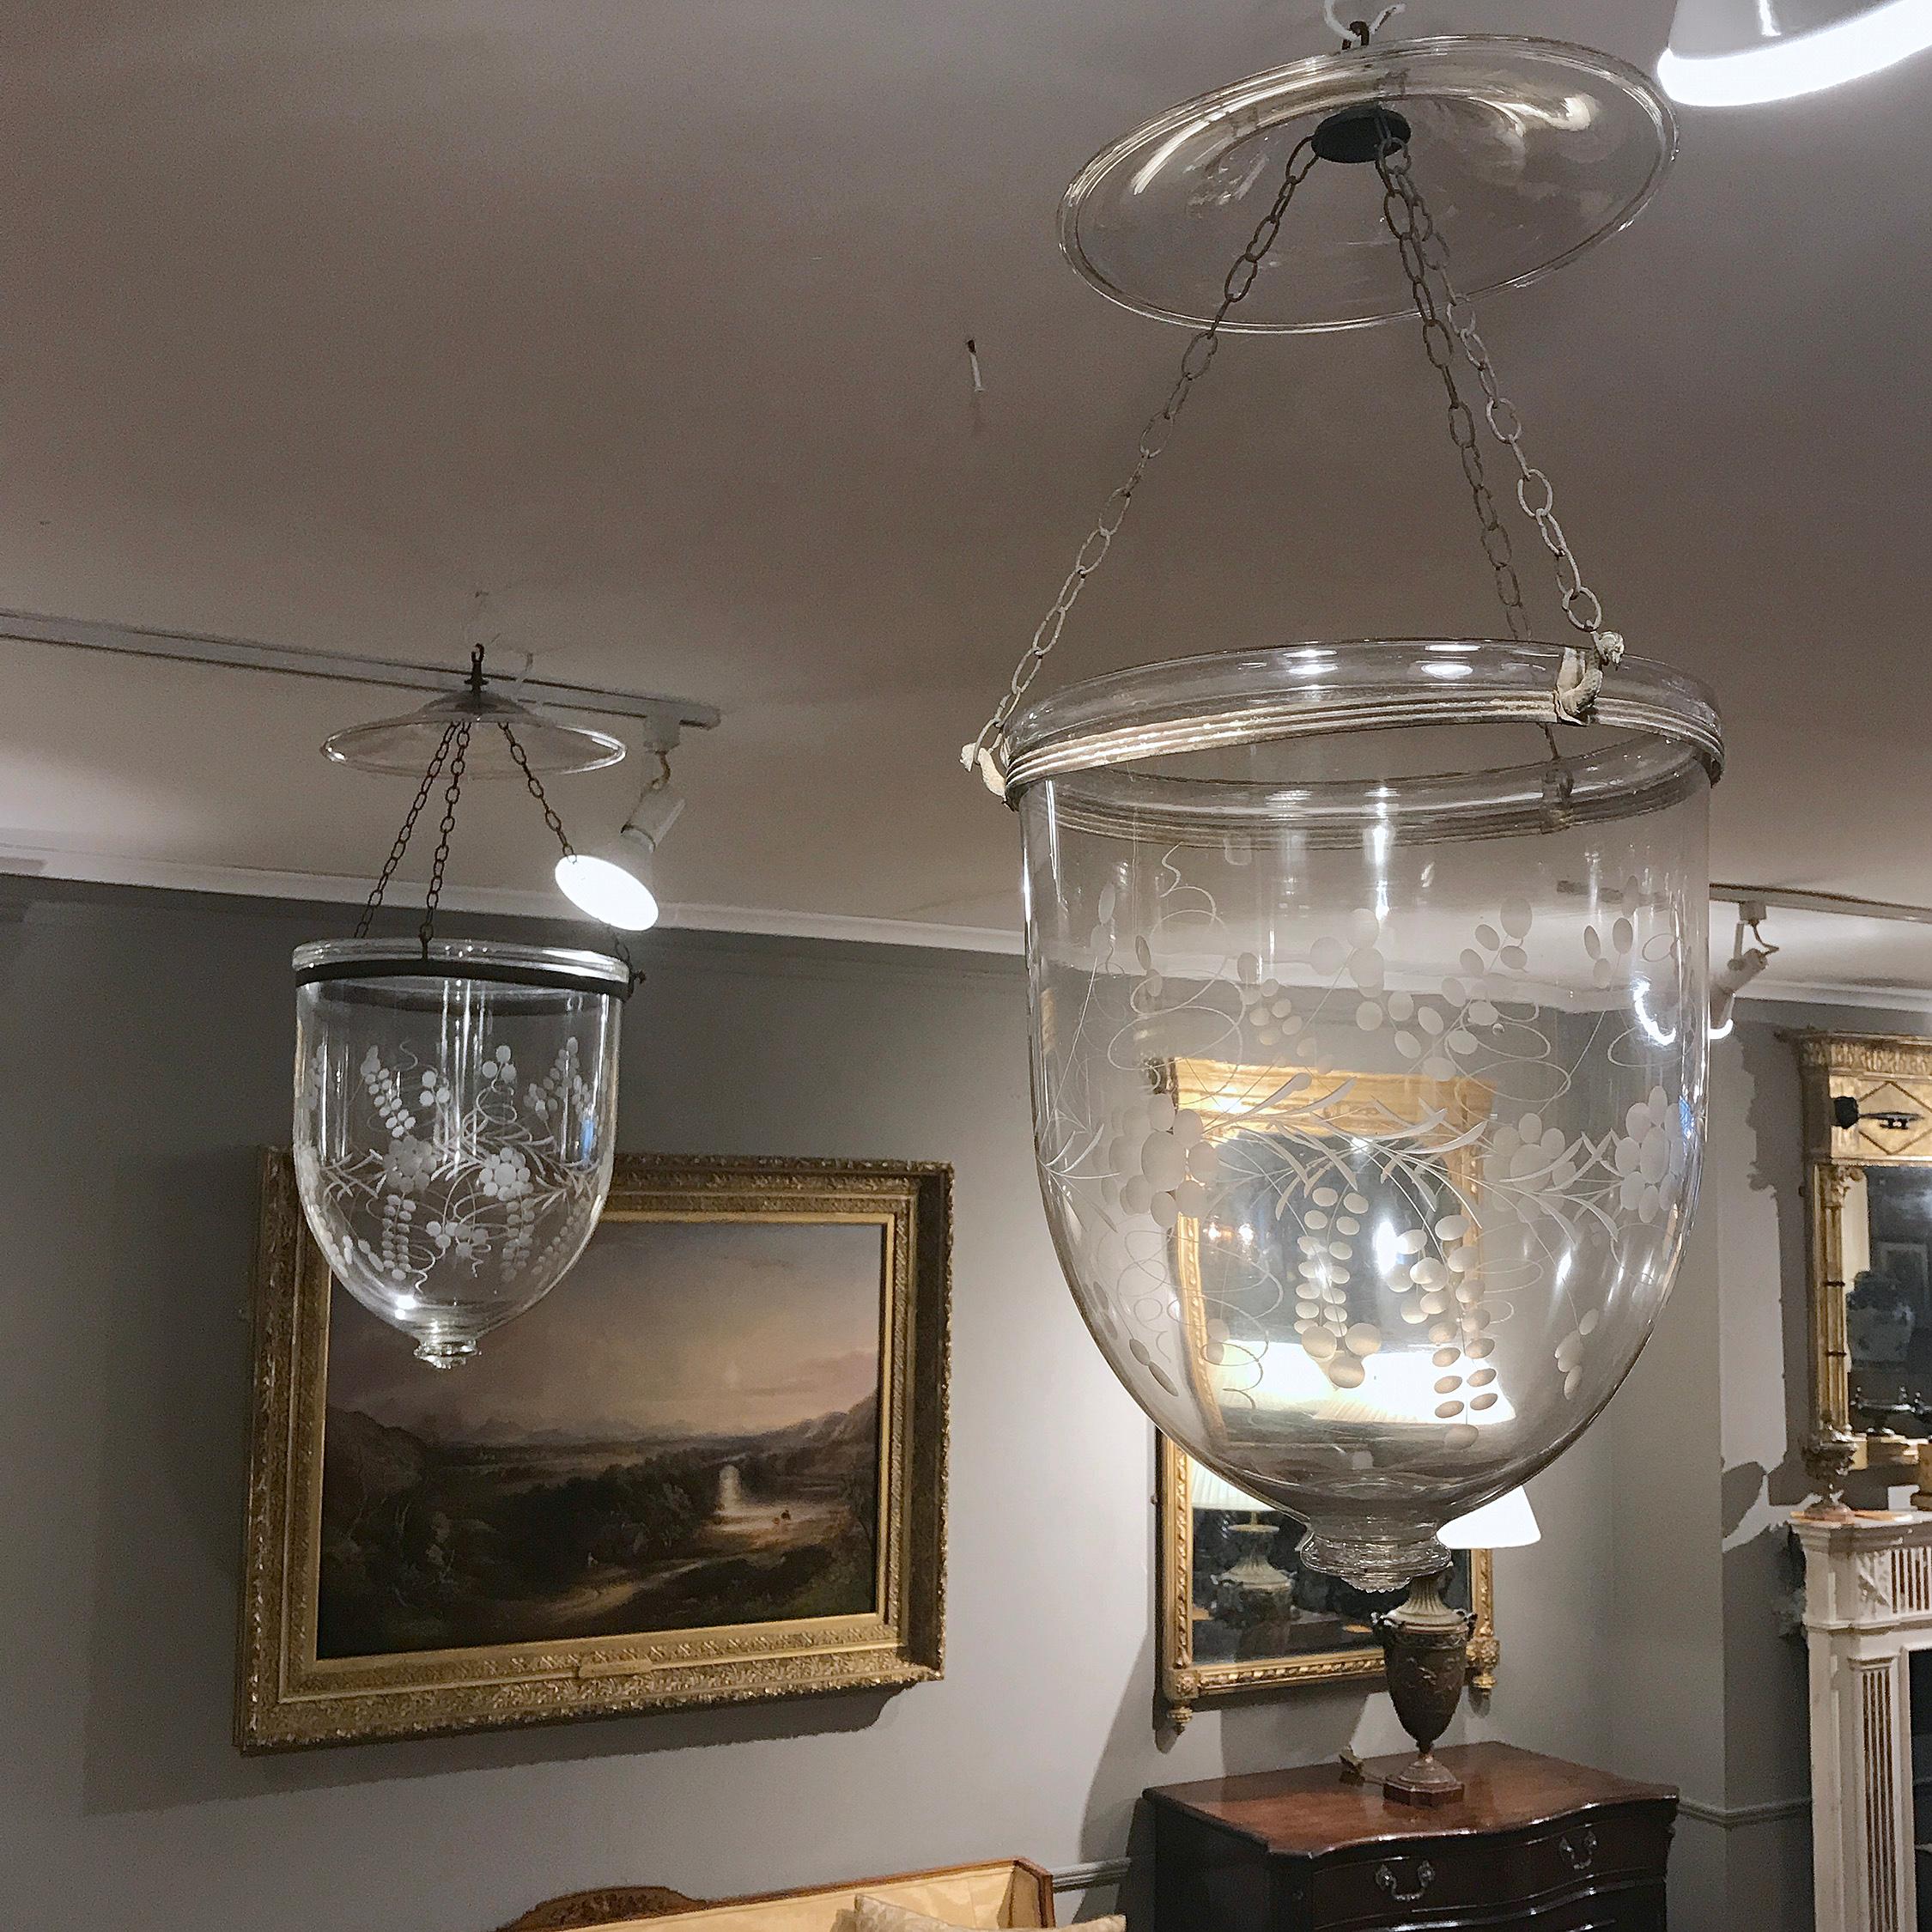 Each of these beautiful 19th century handblown glass bell jar lanterns is ornamented with an etched grape-and-vine motif. Three chains from the glass smoke bell and brass canopy attach to peacock-shaped hooks on the original rolled brass band,